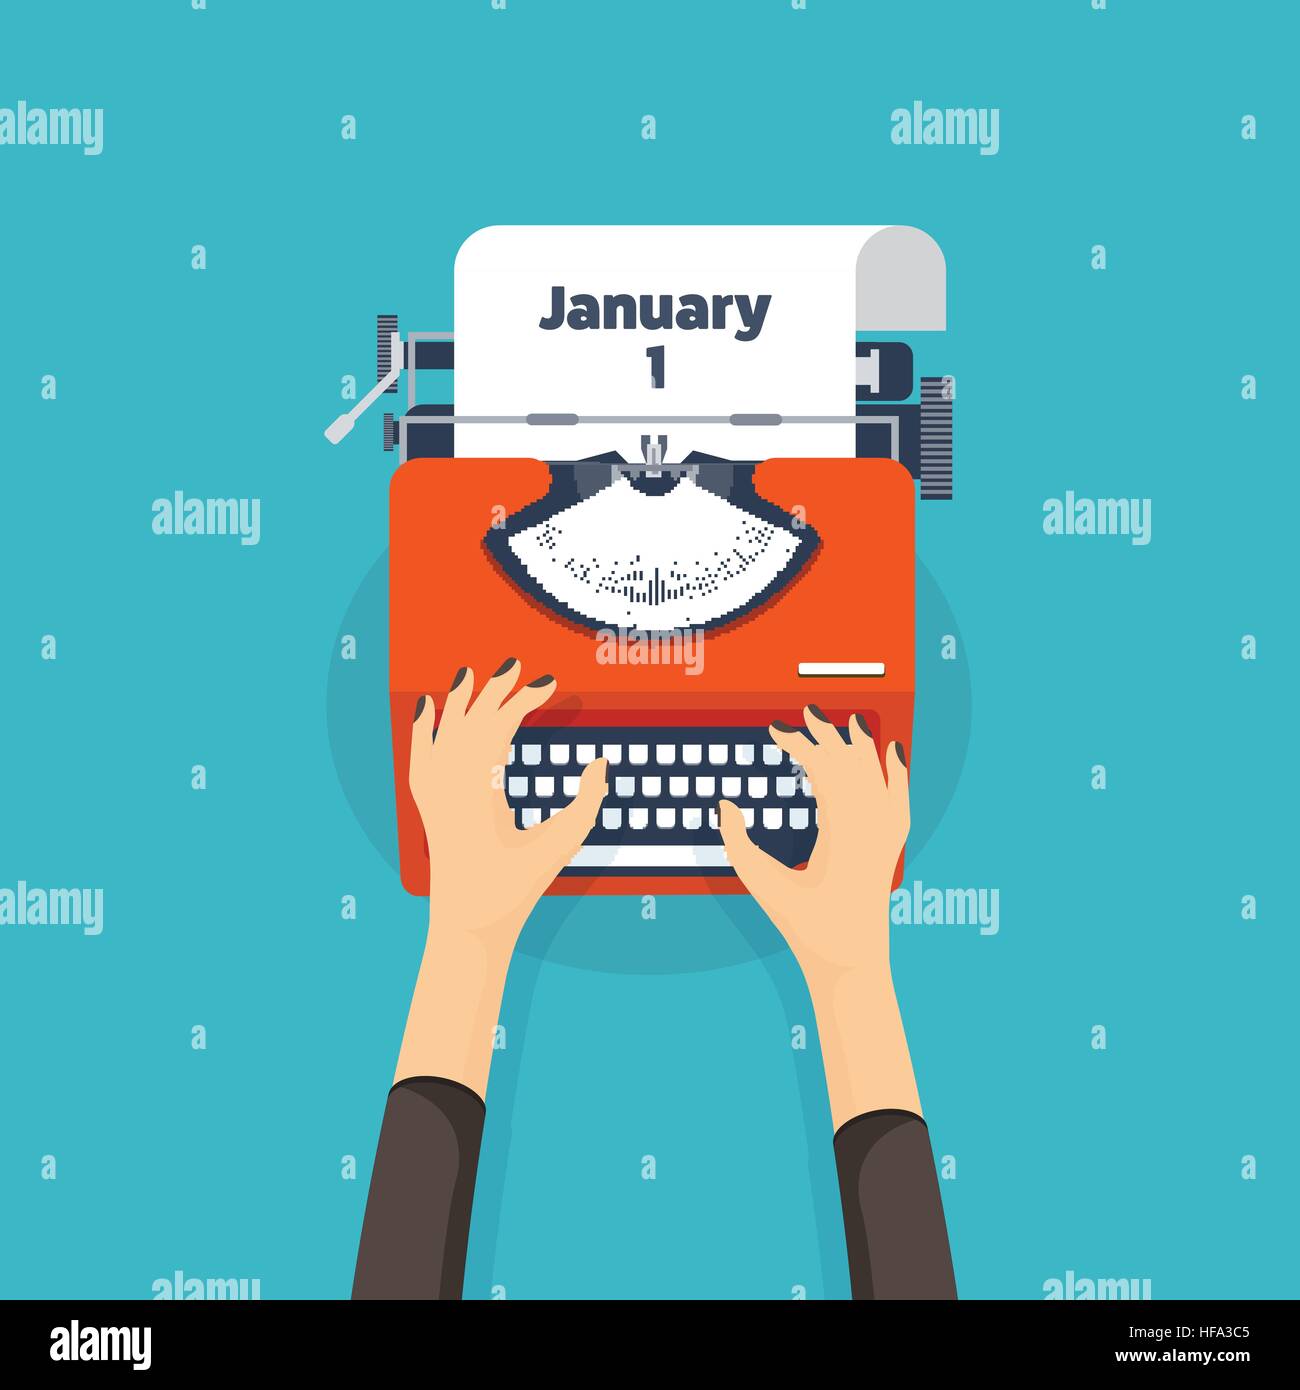 Typewriter in a flat style. Christmas wish list. Letter to Santa. New year. 2017. December holidays. January 1. Stock Vector